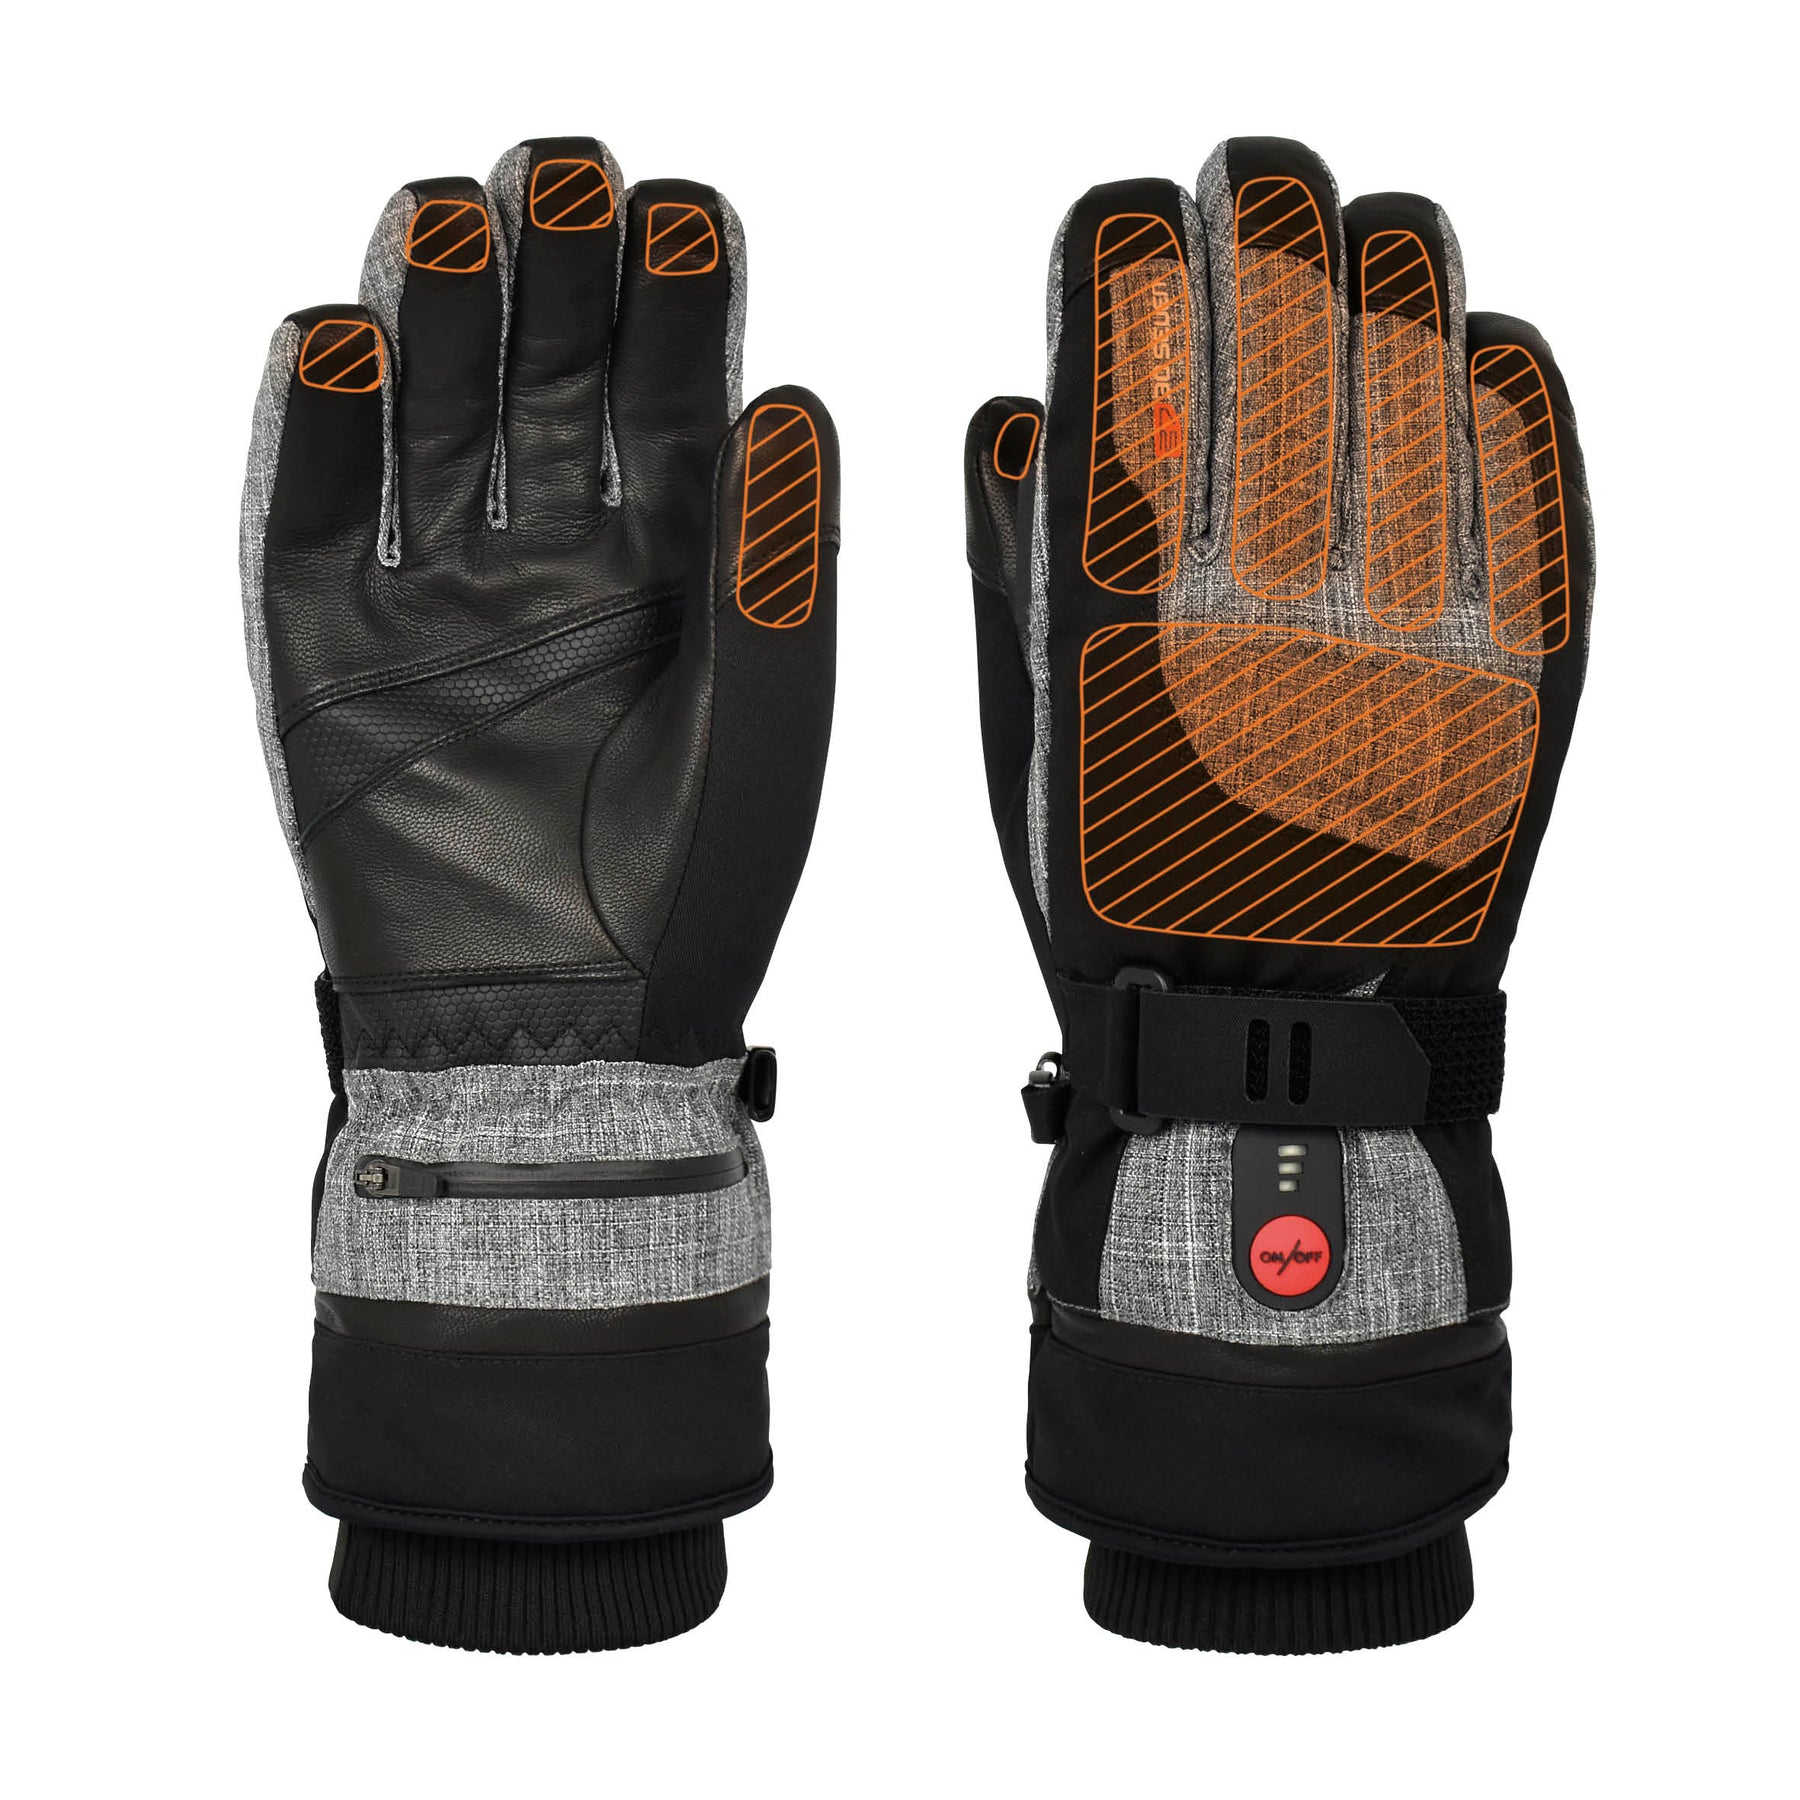 Thinsulate Comfort Heated Gloves - Stay Warm Without Sacrificing